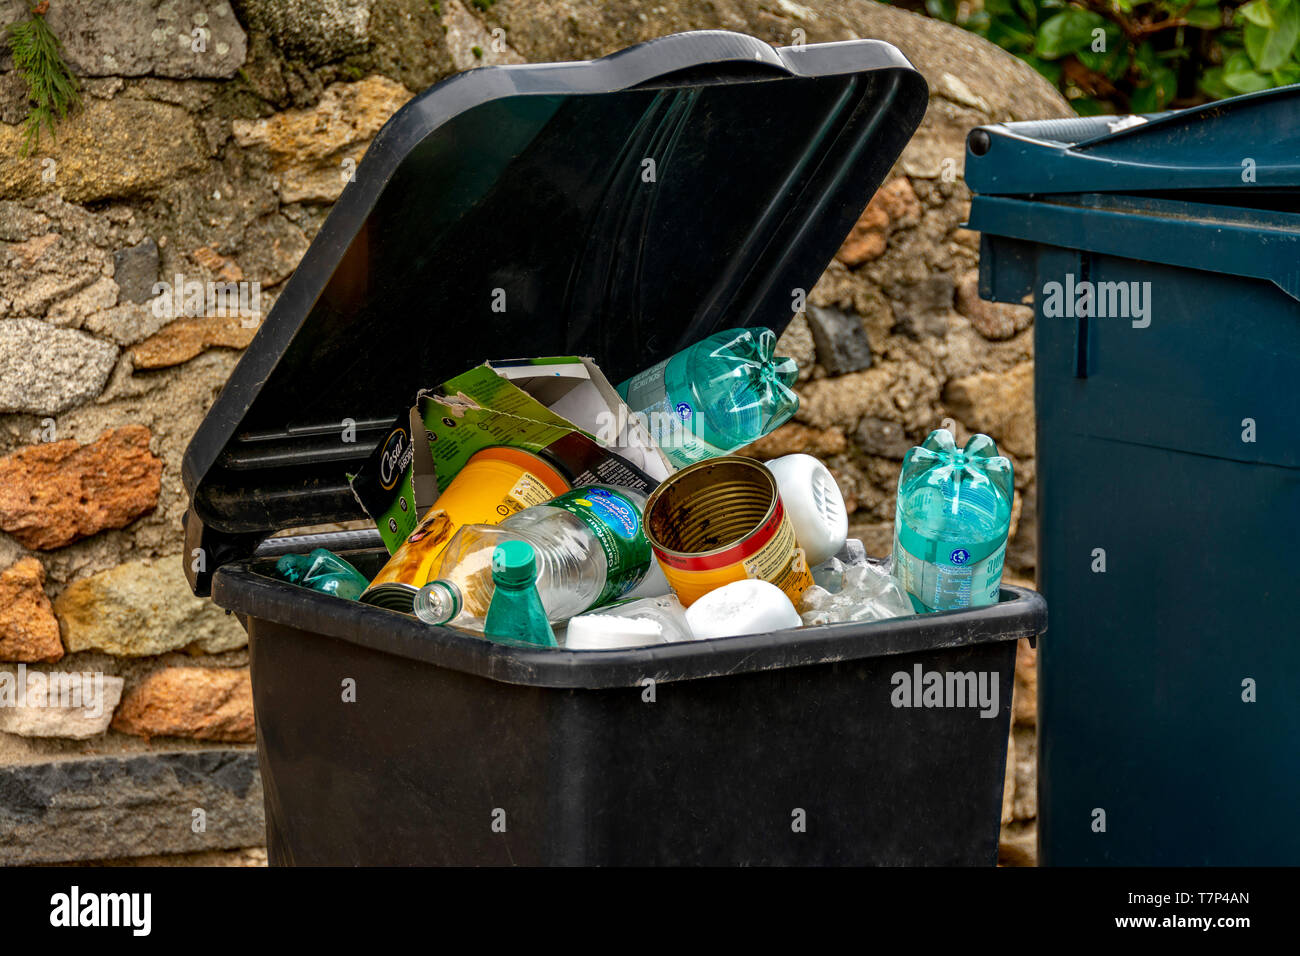 selective waste sorting stock photos & selective waste